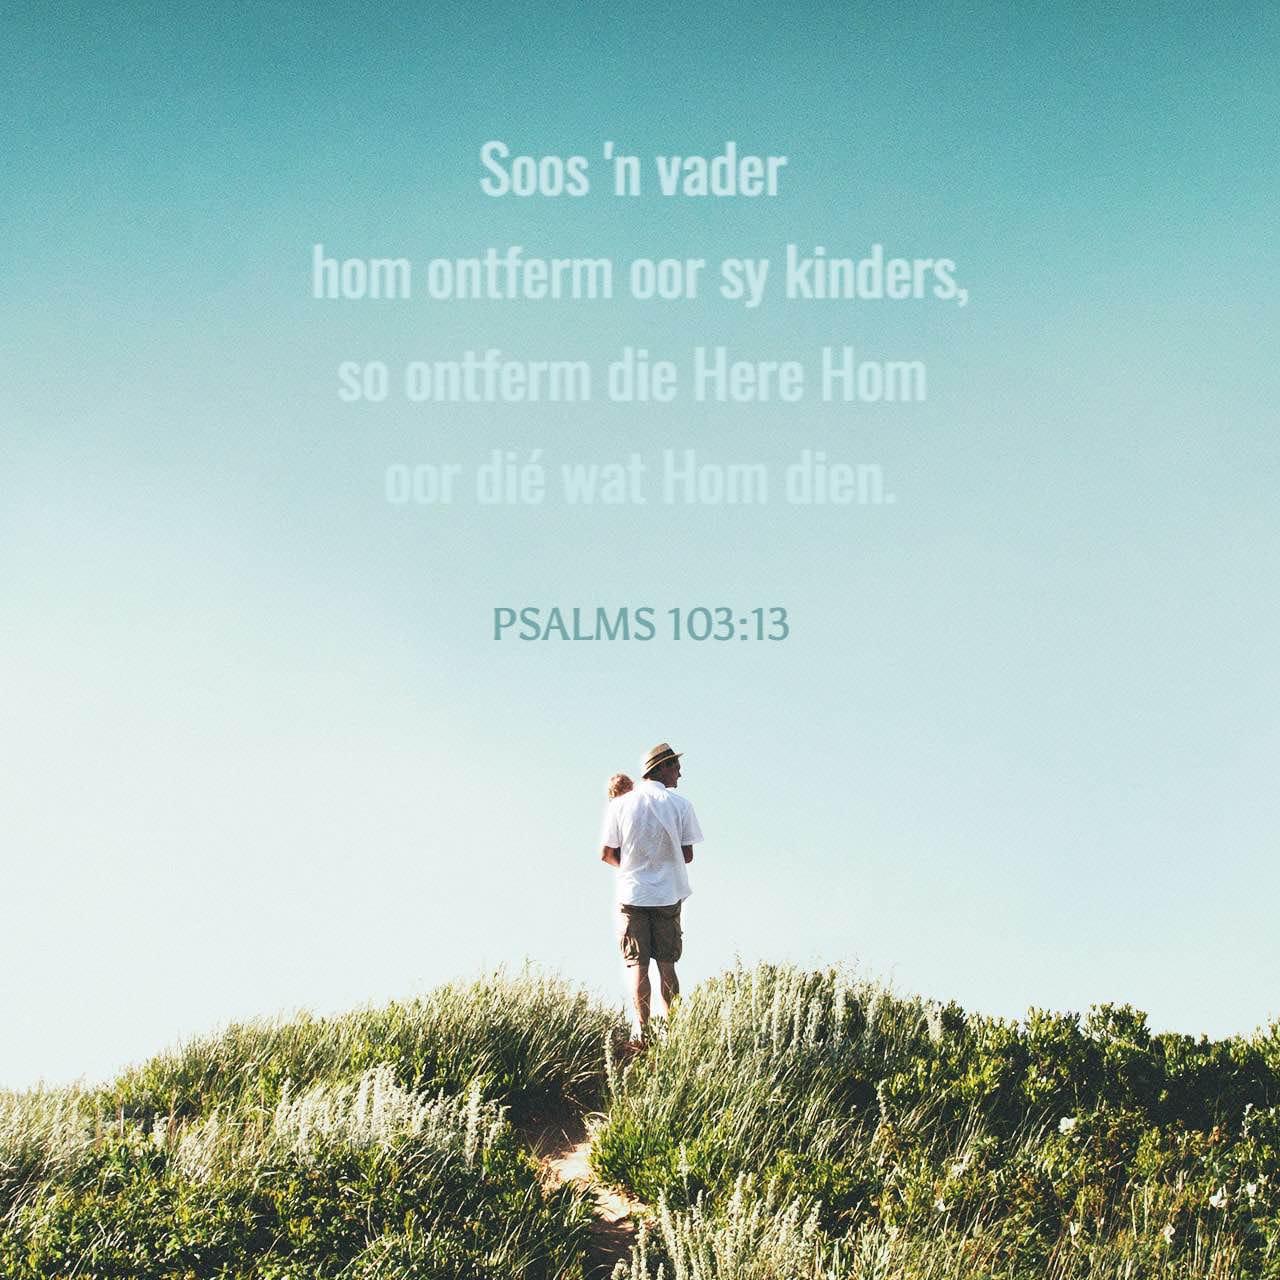 Bible Verse of the Day - day 85 - image 37533 (PSALMS 103:13)